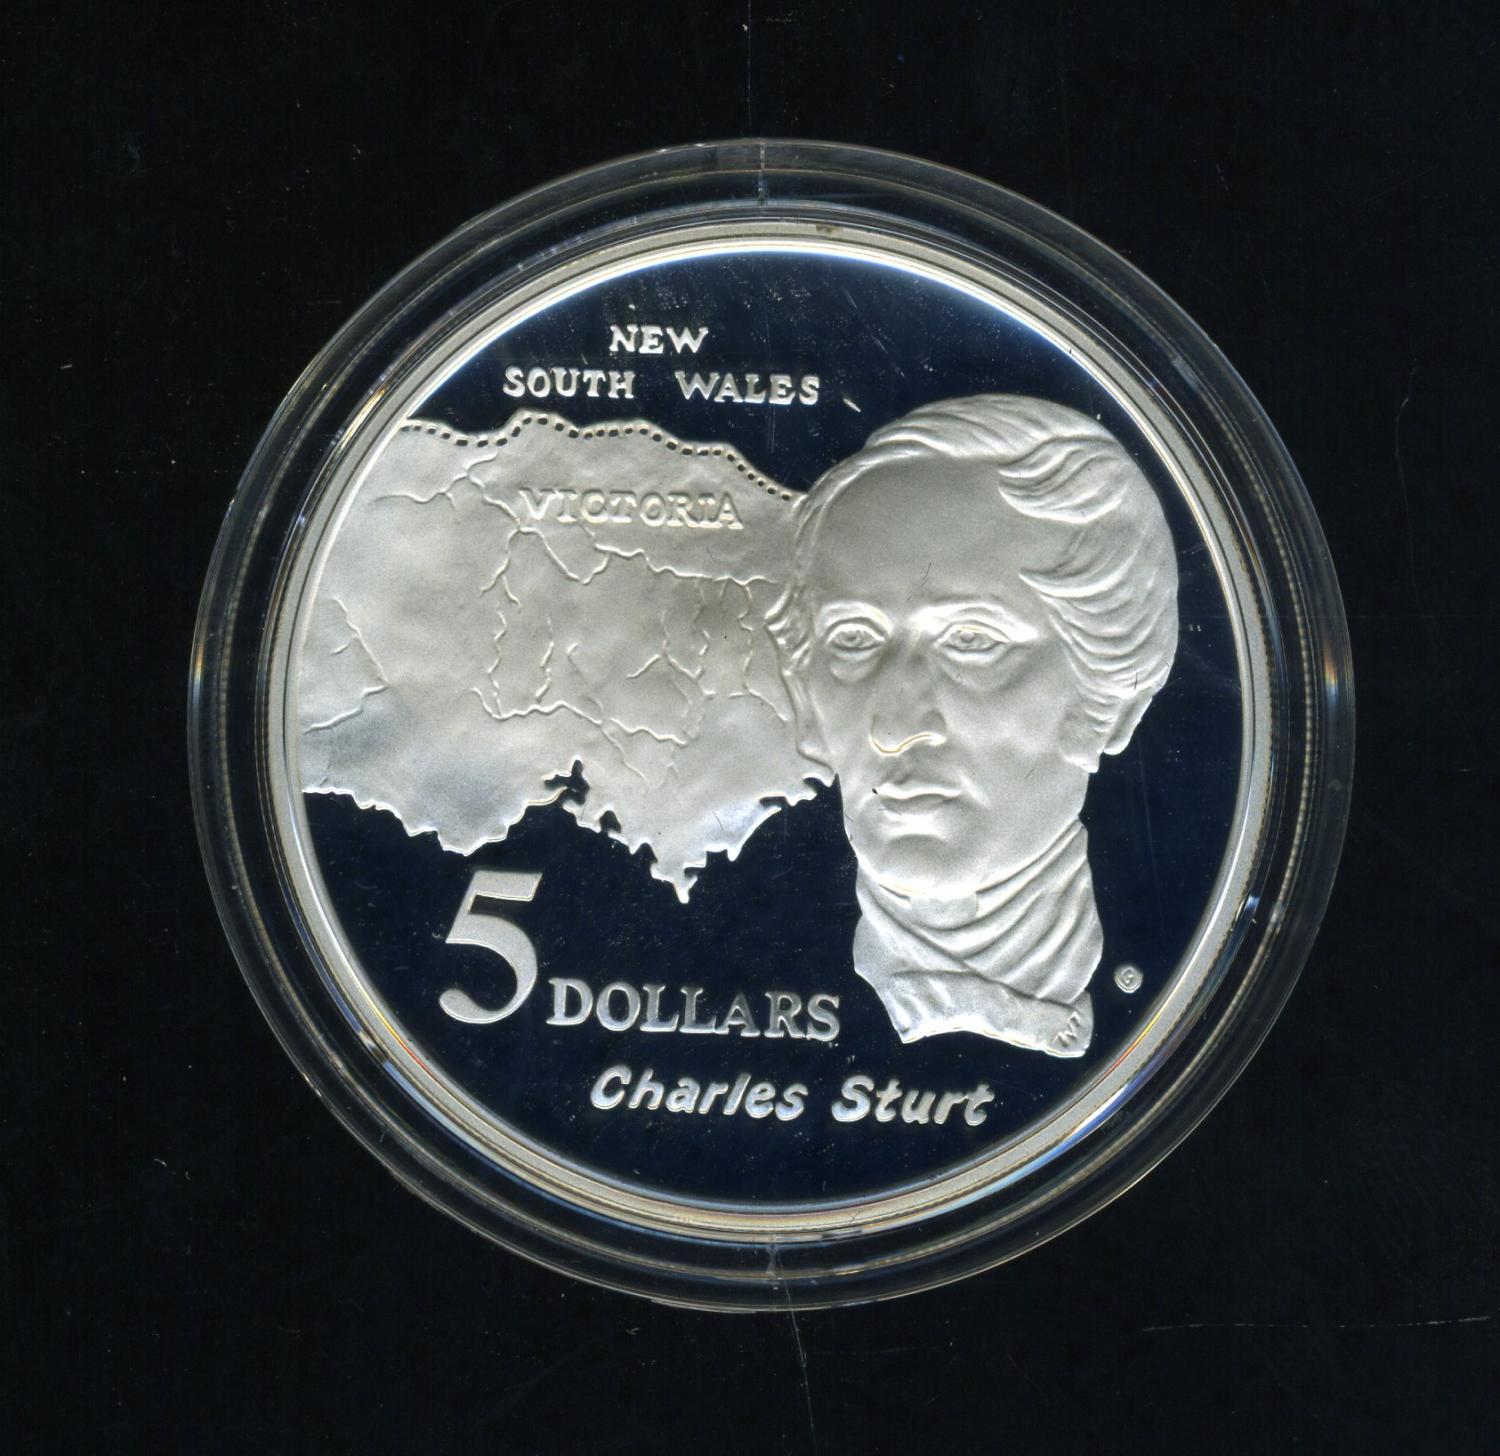 Thumbnail for 1994 Australian $5 Silver Coin From Masterpieces in Silver Set - Charles Sturt.  The Coin is Sterling Silver and contains over 1oz of Pure Silver.